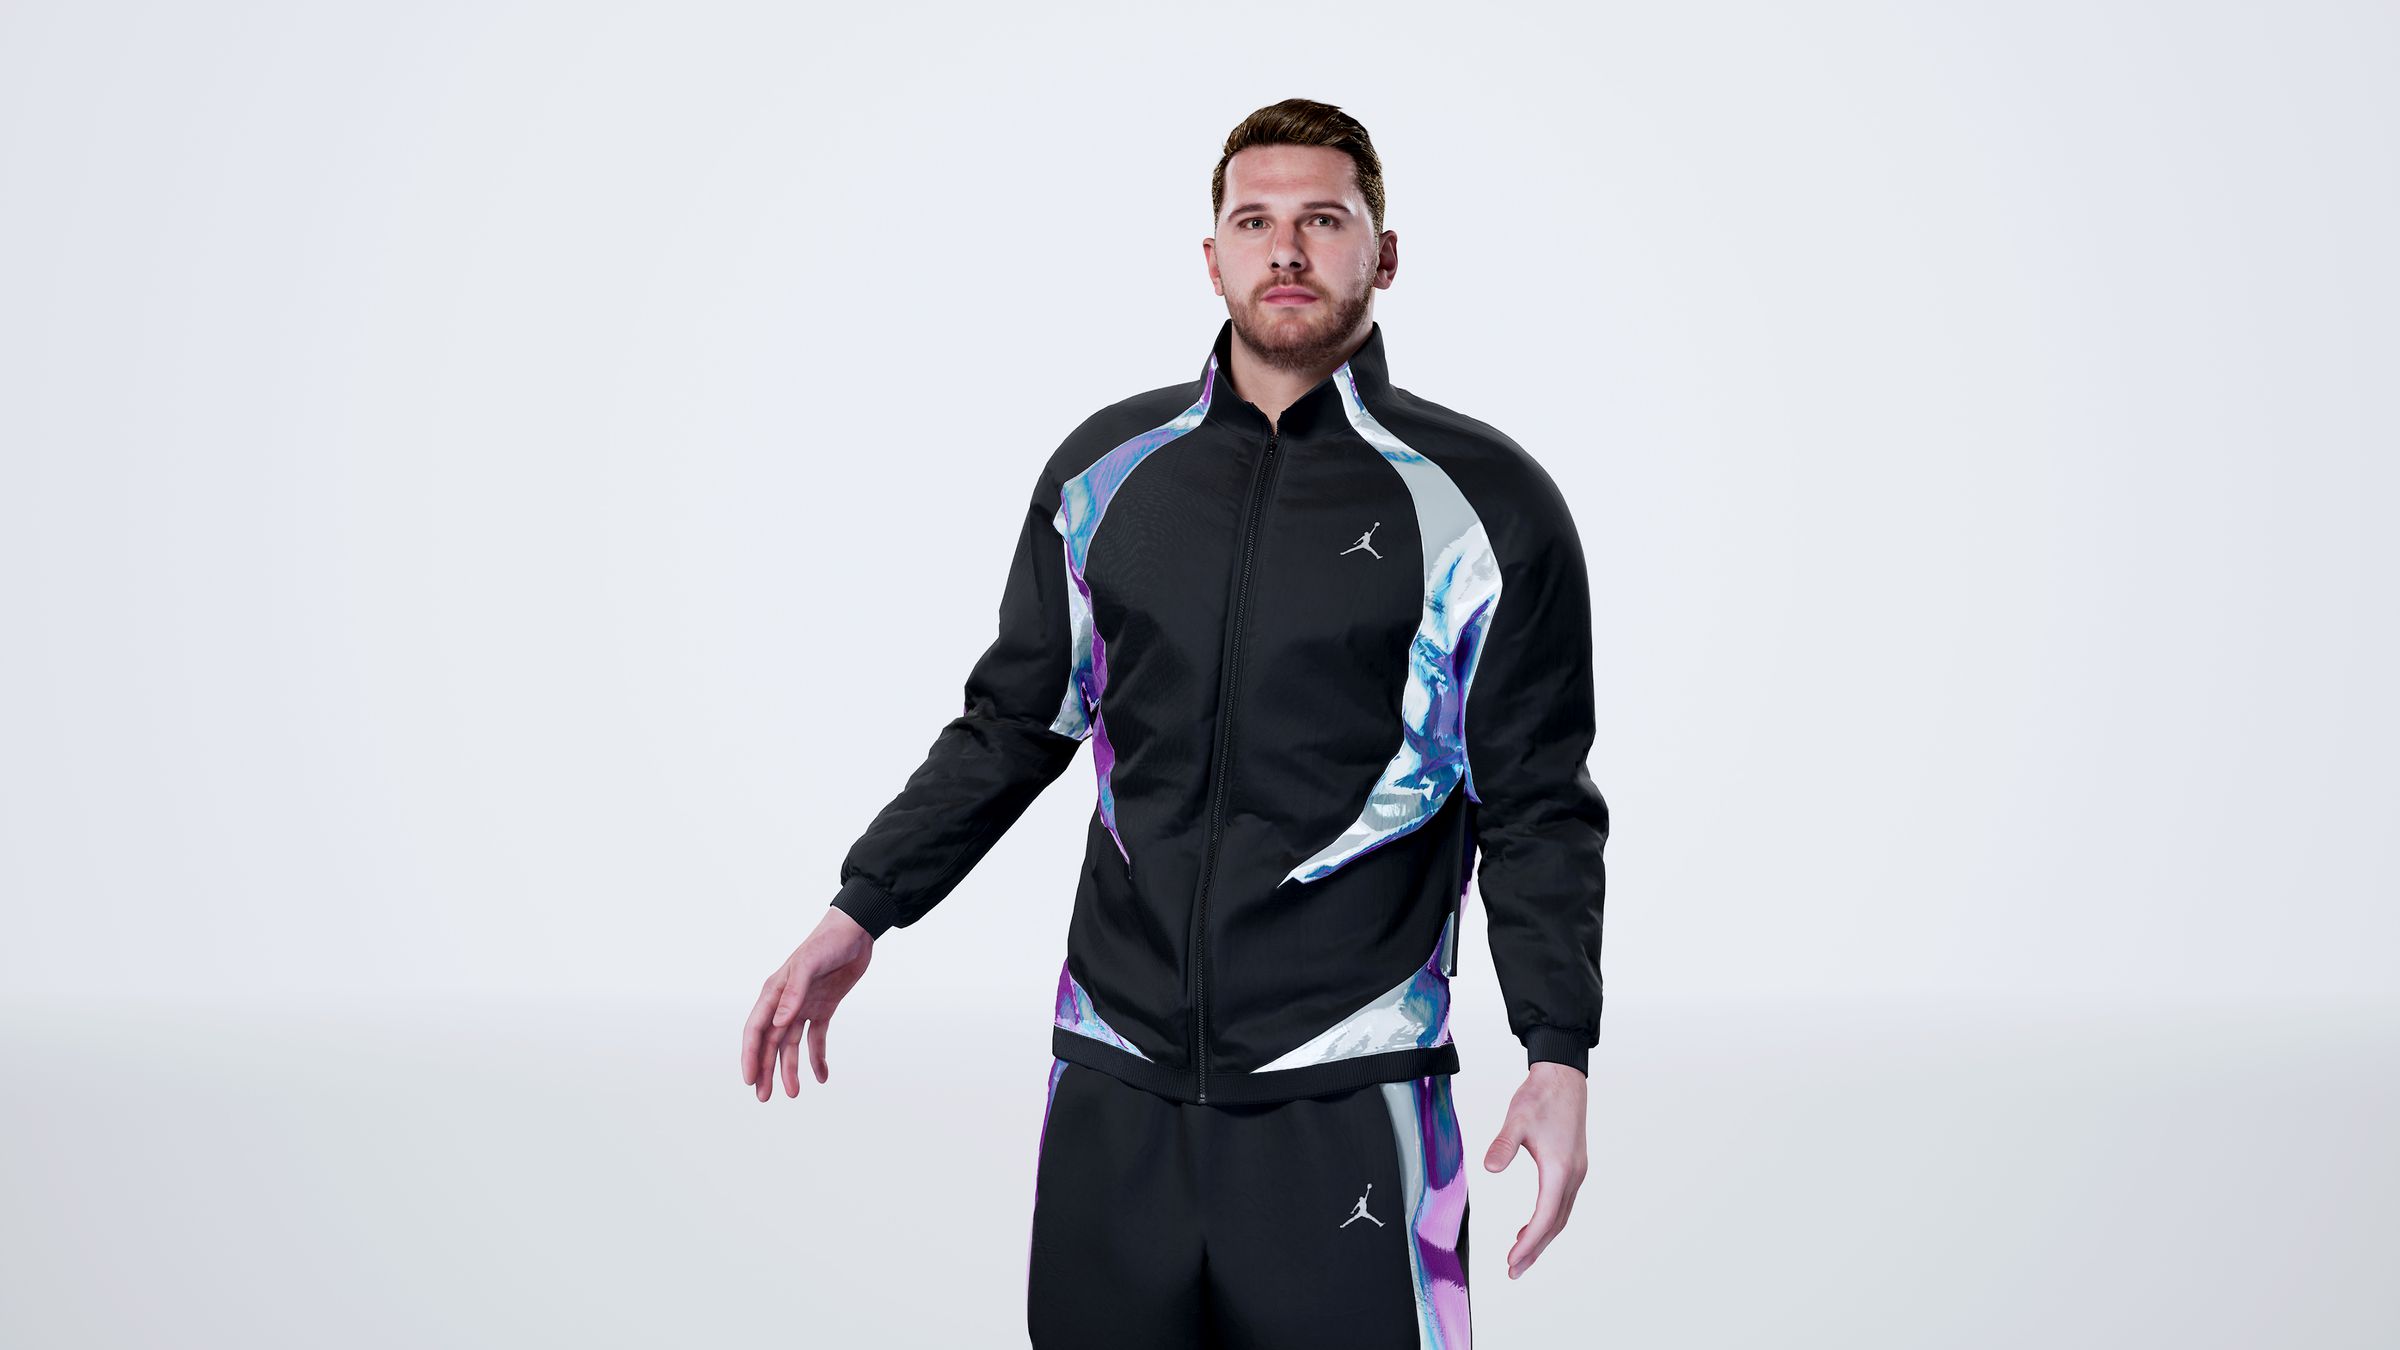 Another digital recreation of Luka Dončić stands in a white room, this one a little closer to the camera.